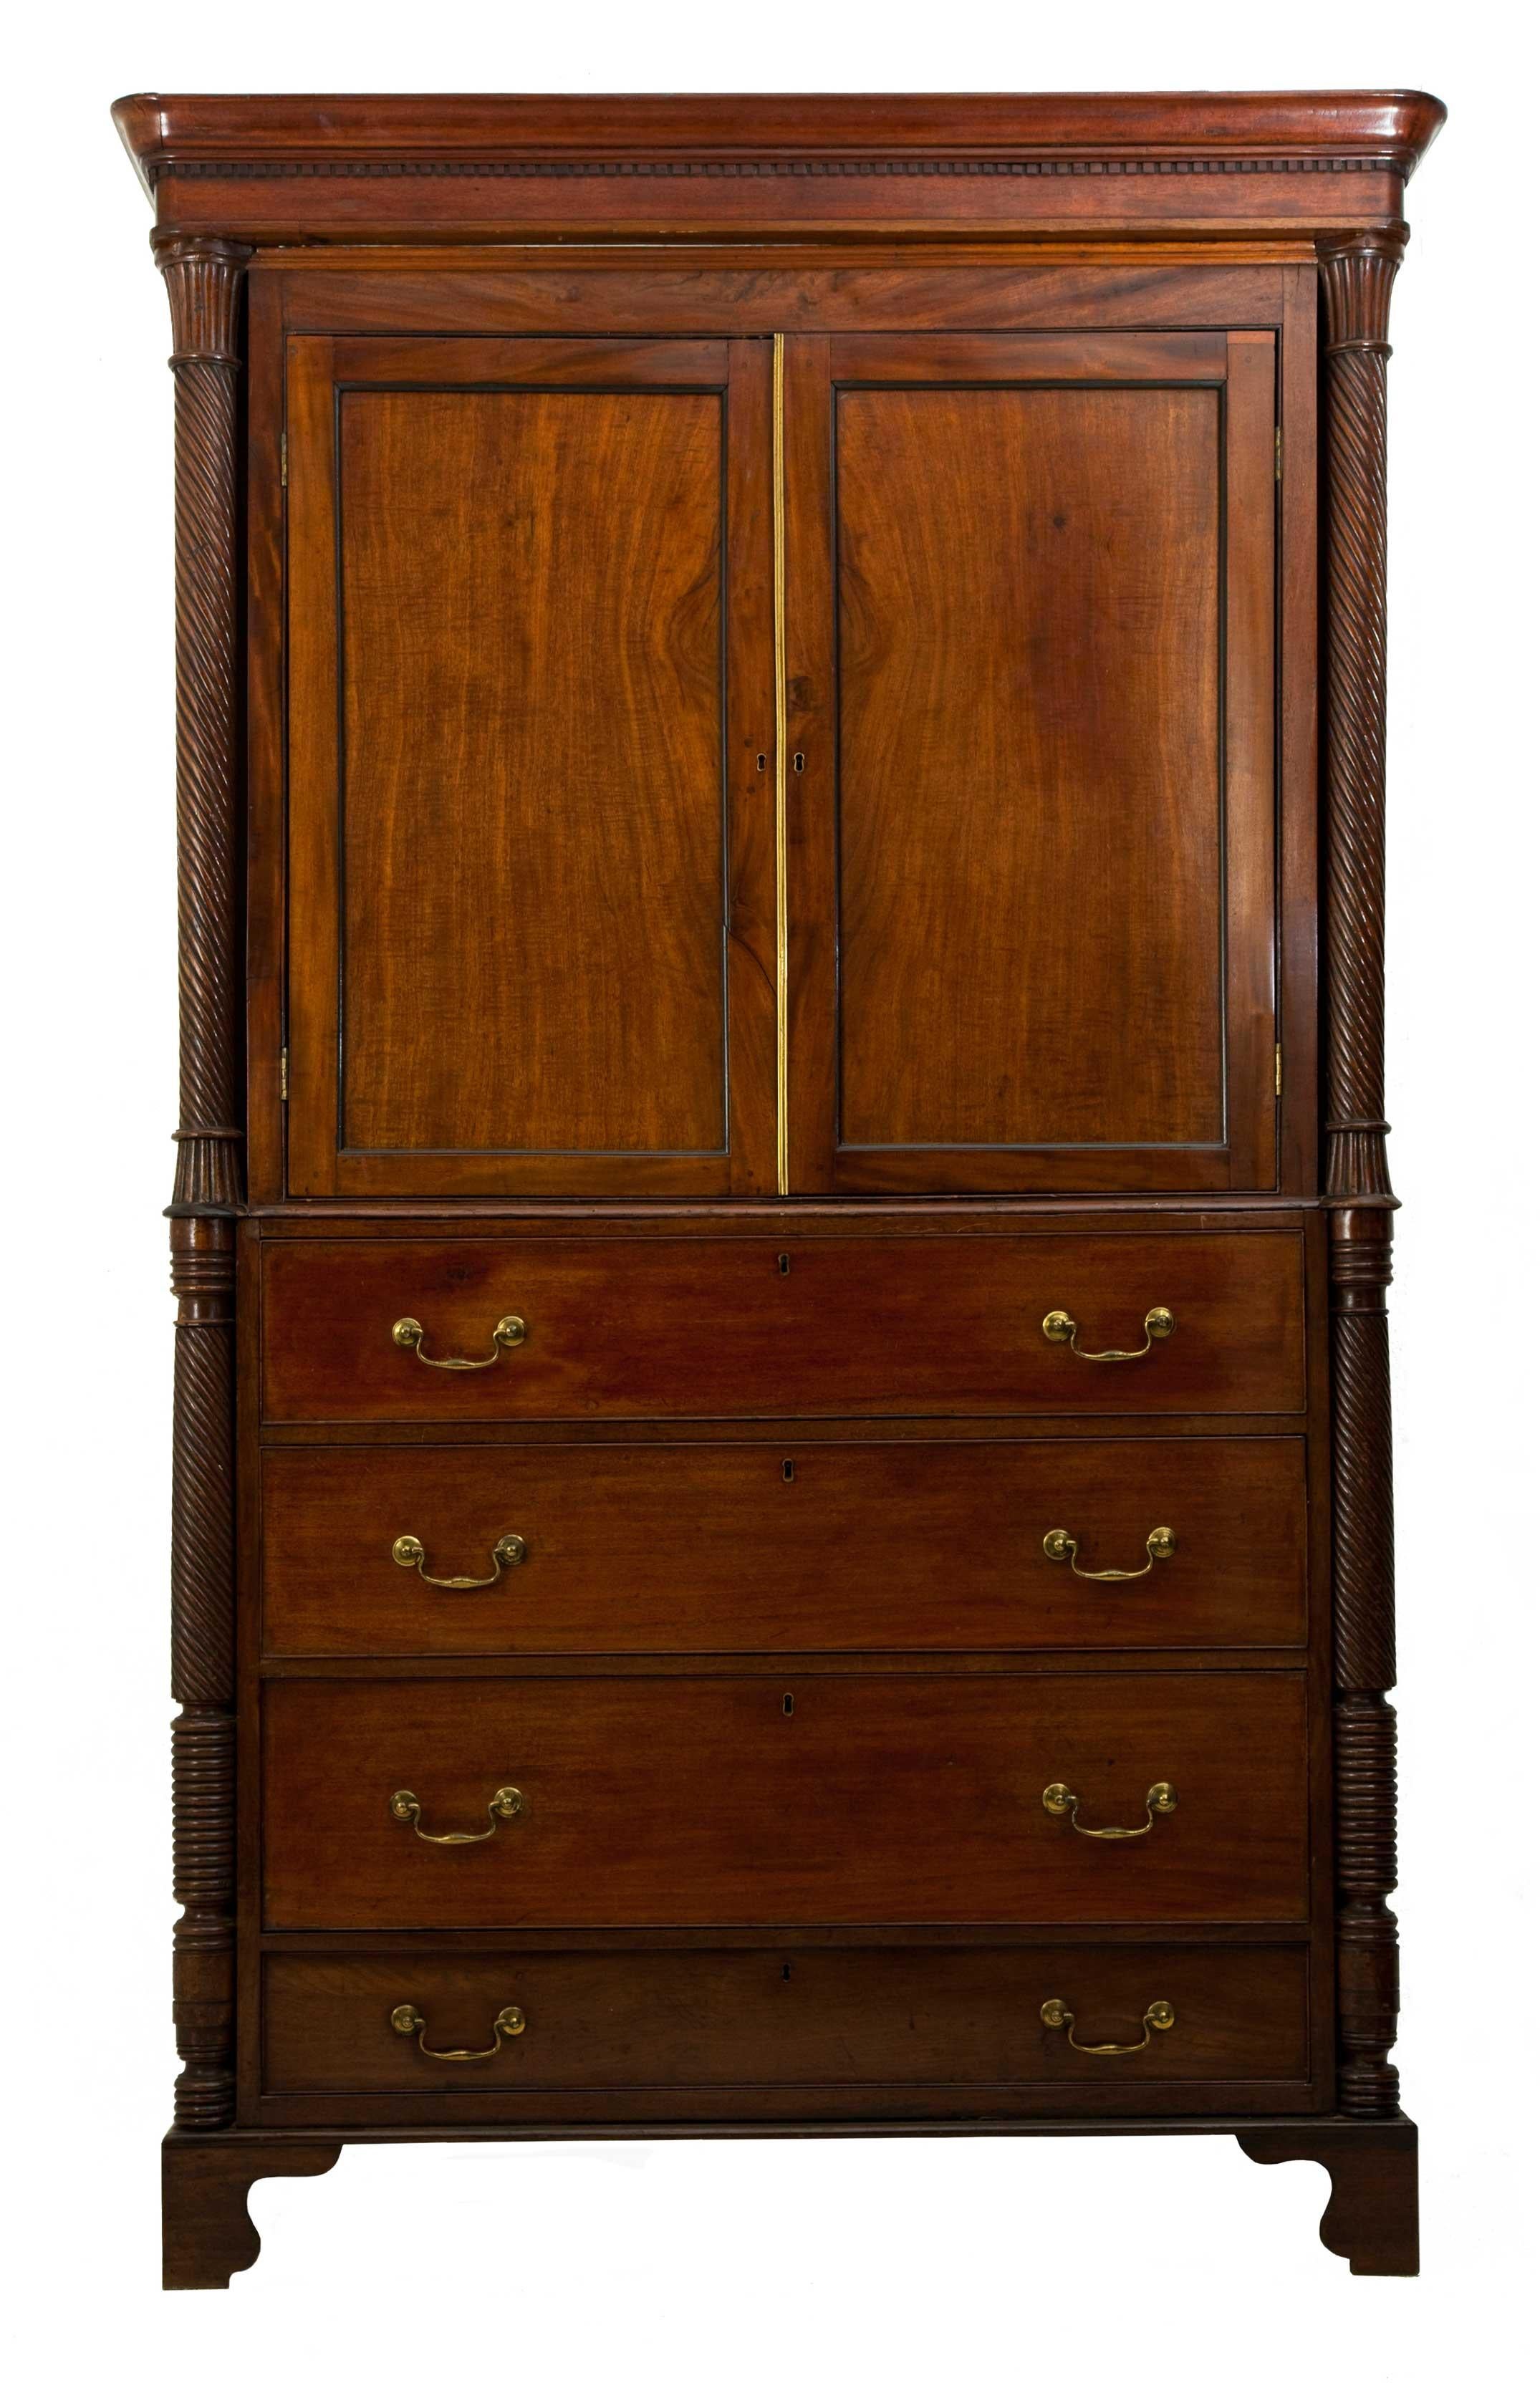 Regency mahogany press cupboard, circa 1810.
Rounded cornice with dental frieze beneath, two brass beaded cupboard doors opening to show removable linen shelves, both flanked by twisted columns.
The bottom with four assorted drawers both flanked